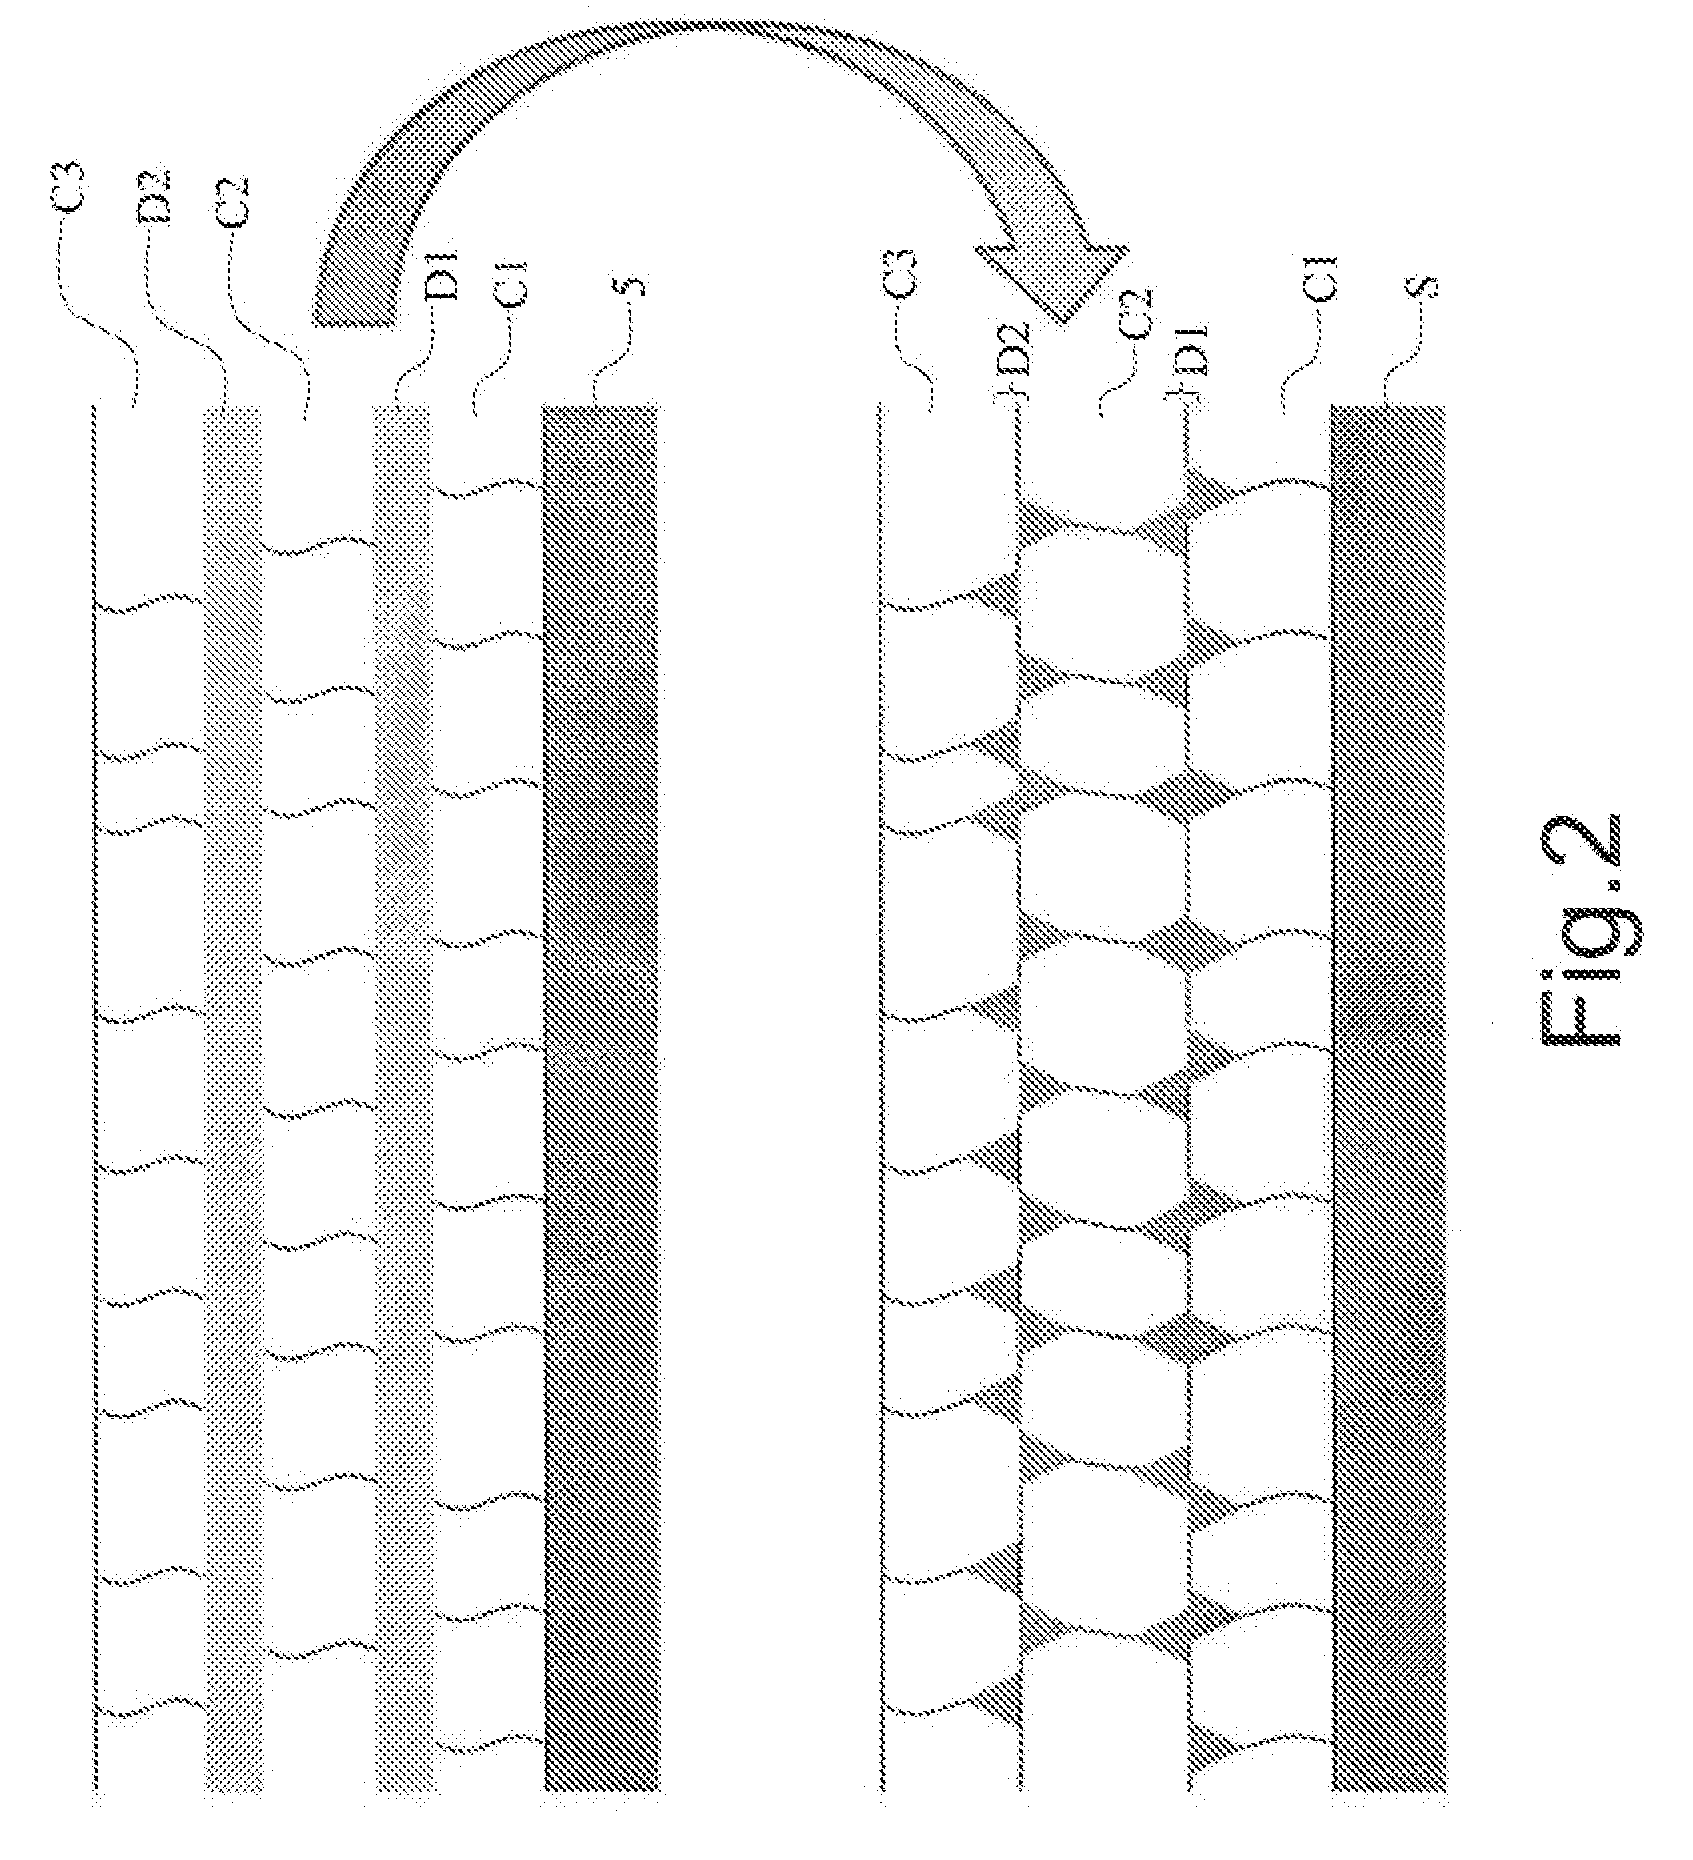 Seebeck/peltier thermoelectric conversion device employing a stack of alternated nanometric layers of conductive and dielectric material and fabrication process